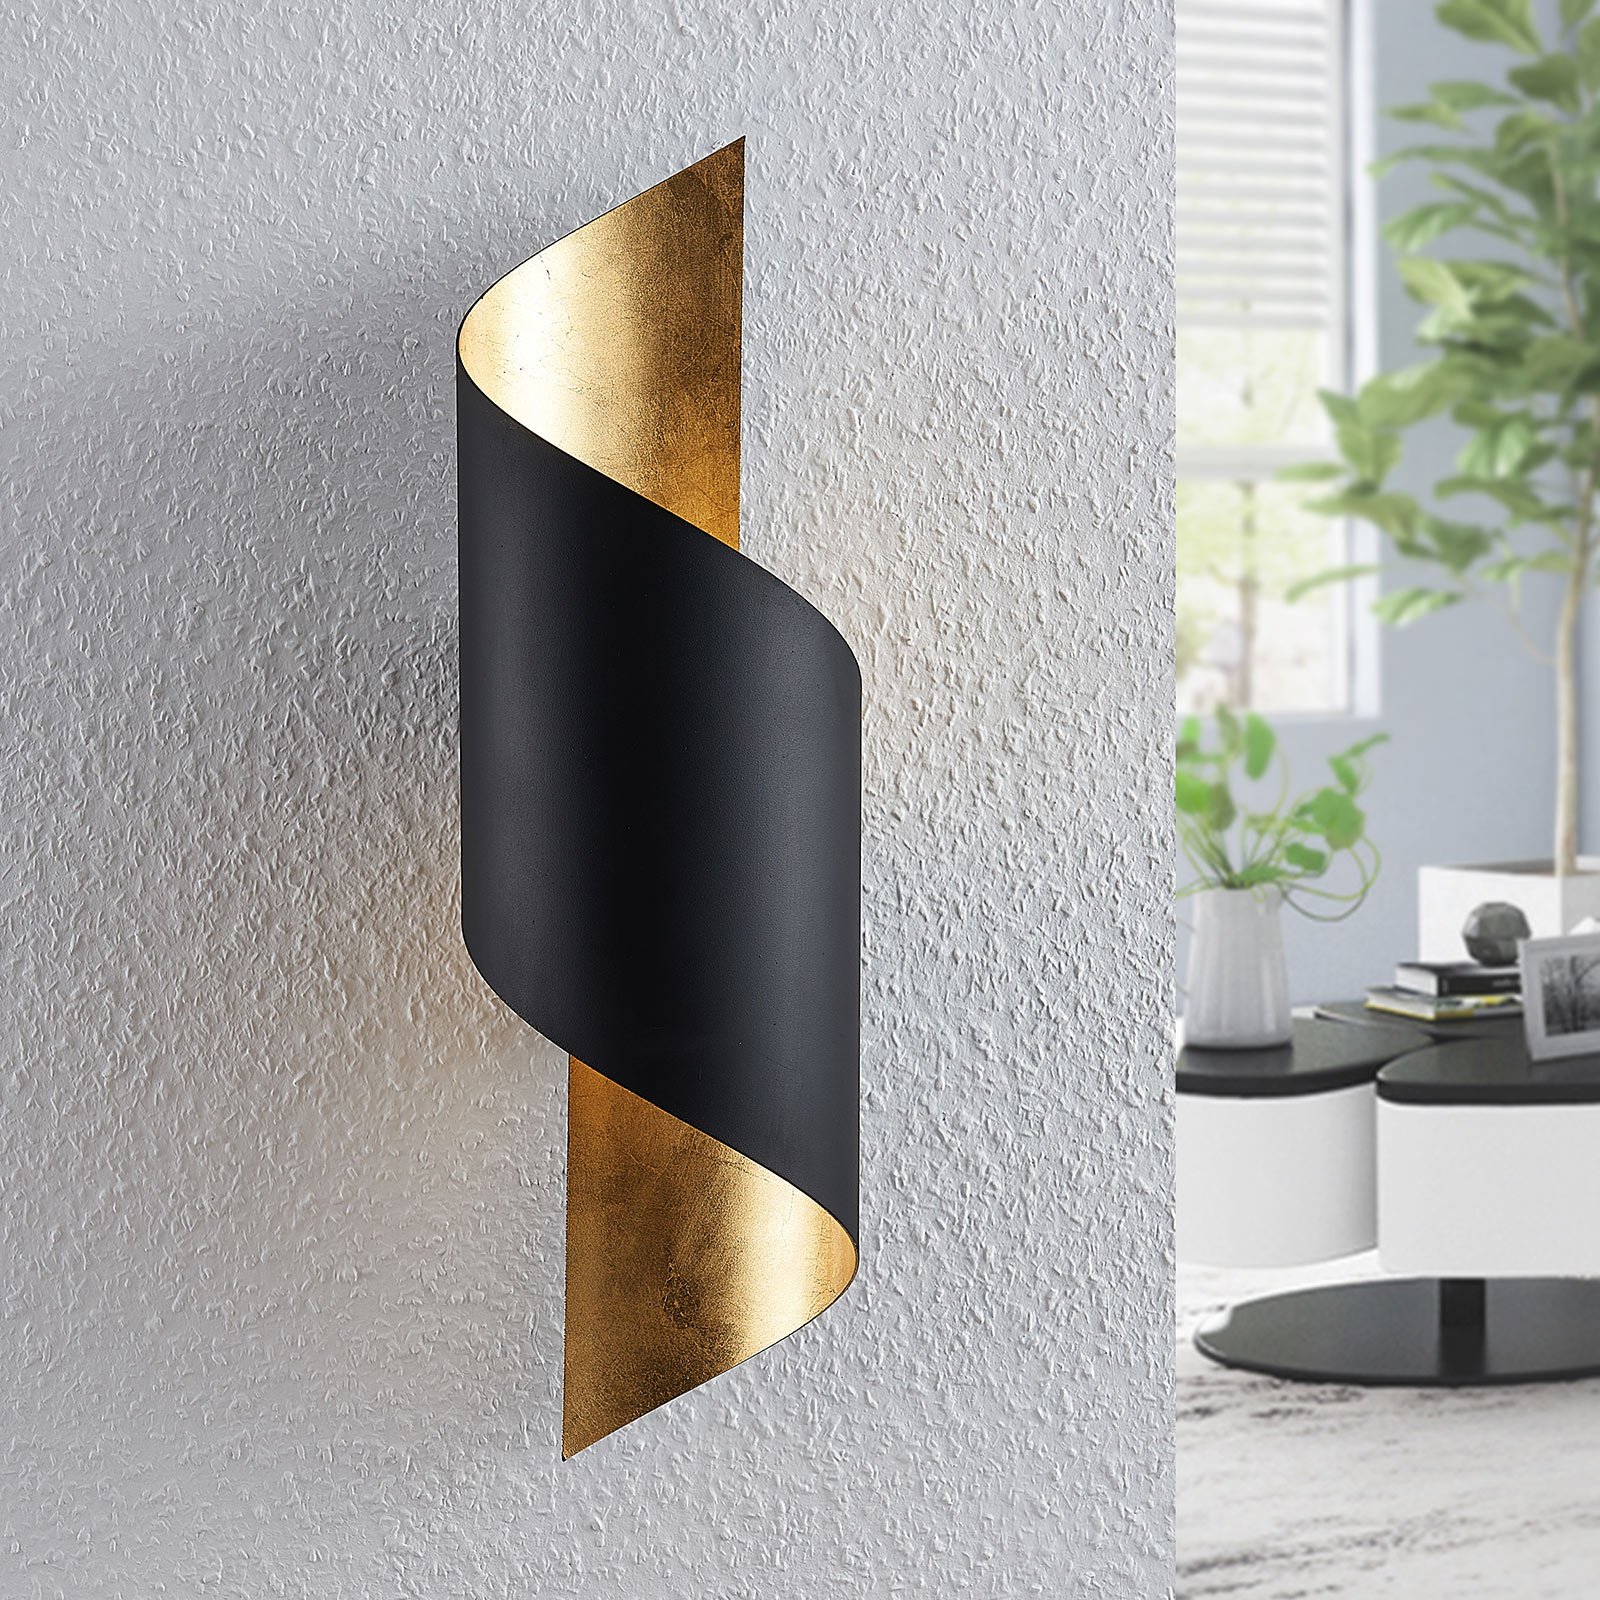 Vanni metal wall light, twisted, black and gold